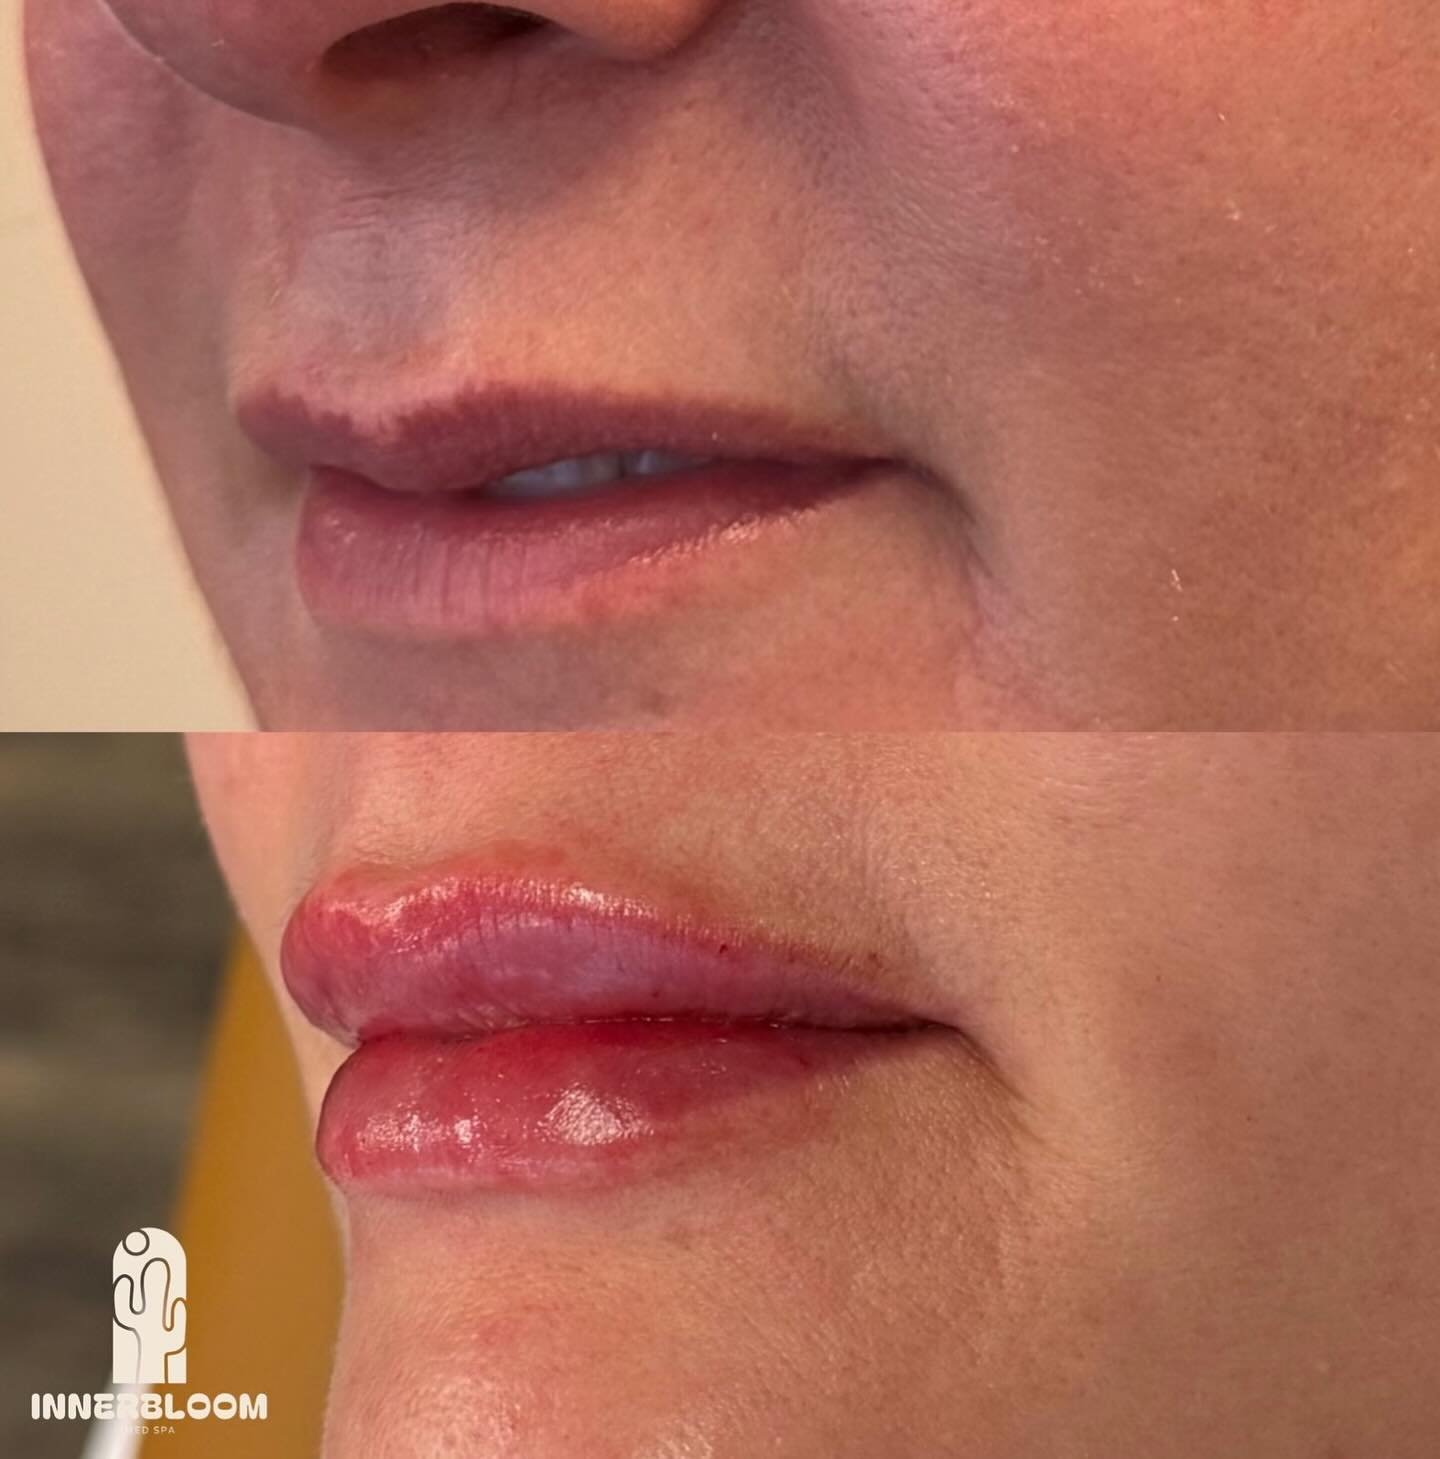 Can&rsquo;t get enough of these lippies 😍 This transformation happened over the course of a month, where the patient received a full syringe of filler split up into 2 appointments.

Product: Revanesse Lips 1.2 mL

NEW PATIENT PROMO: $100 off first f